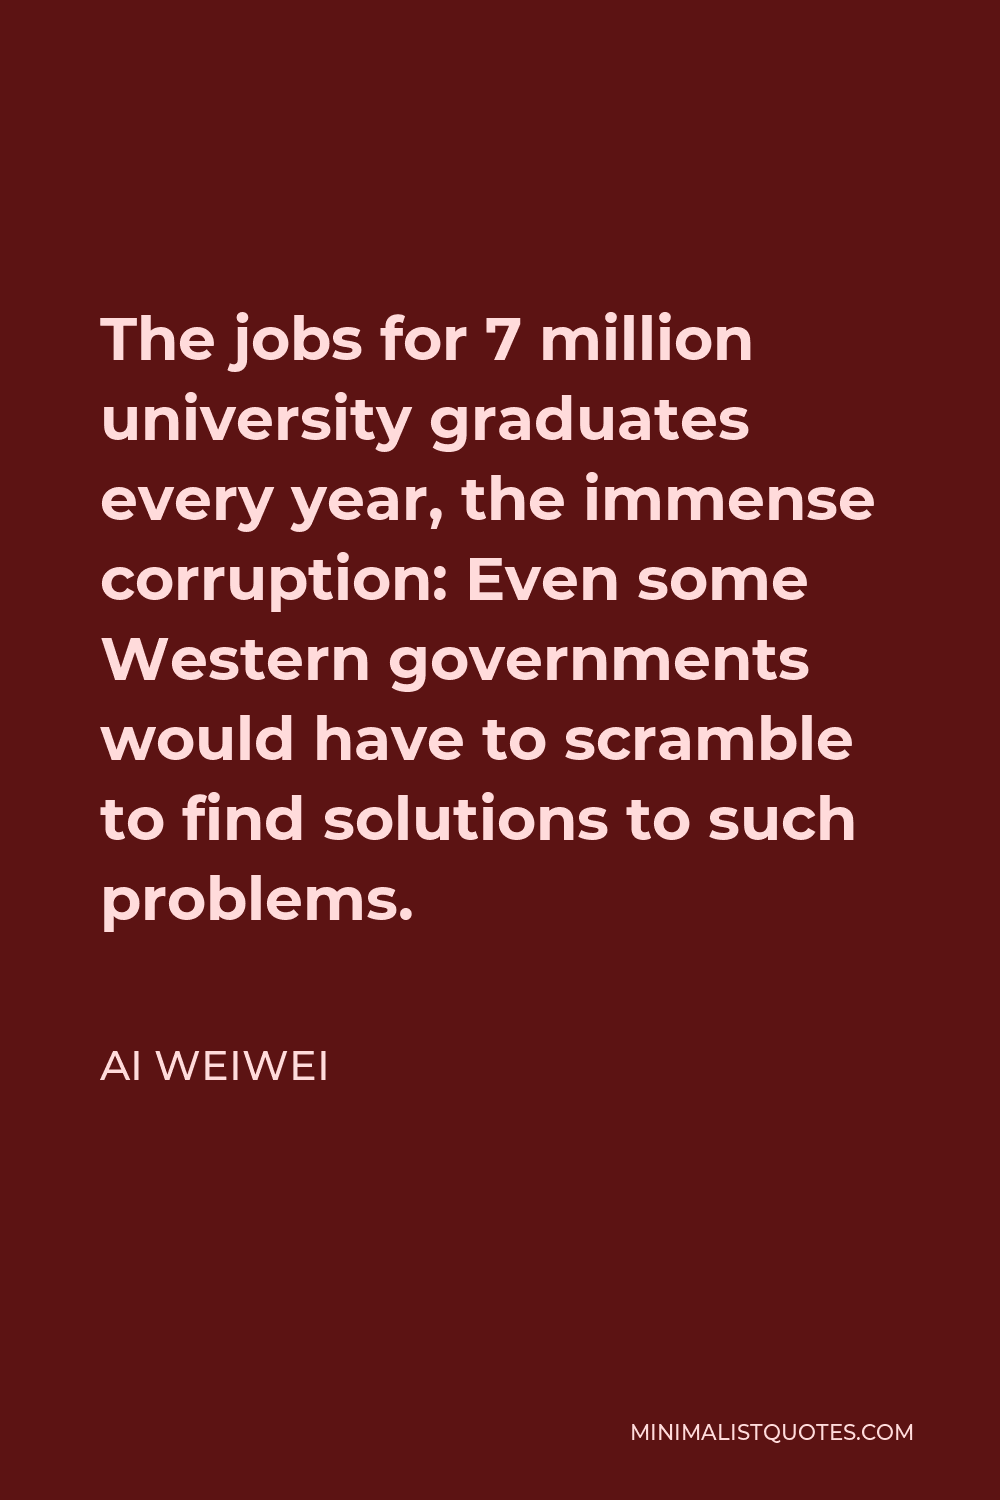 Ai Weiwei Quote - The jobs for 7 million university graduates every year, the immense corruption: Even some Western governments would have to scramble to find solutions to such problems.